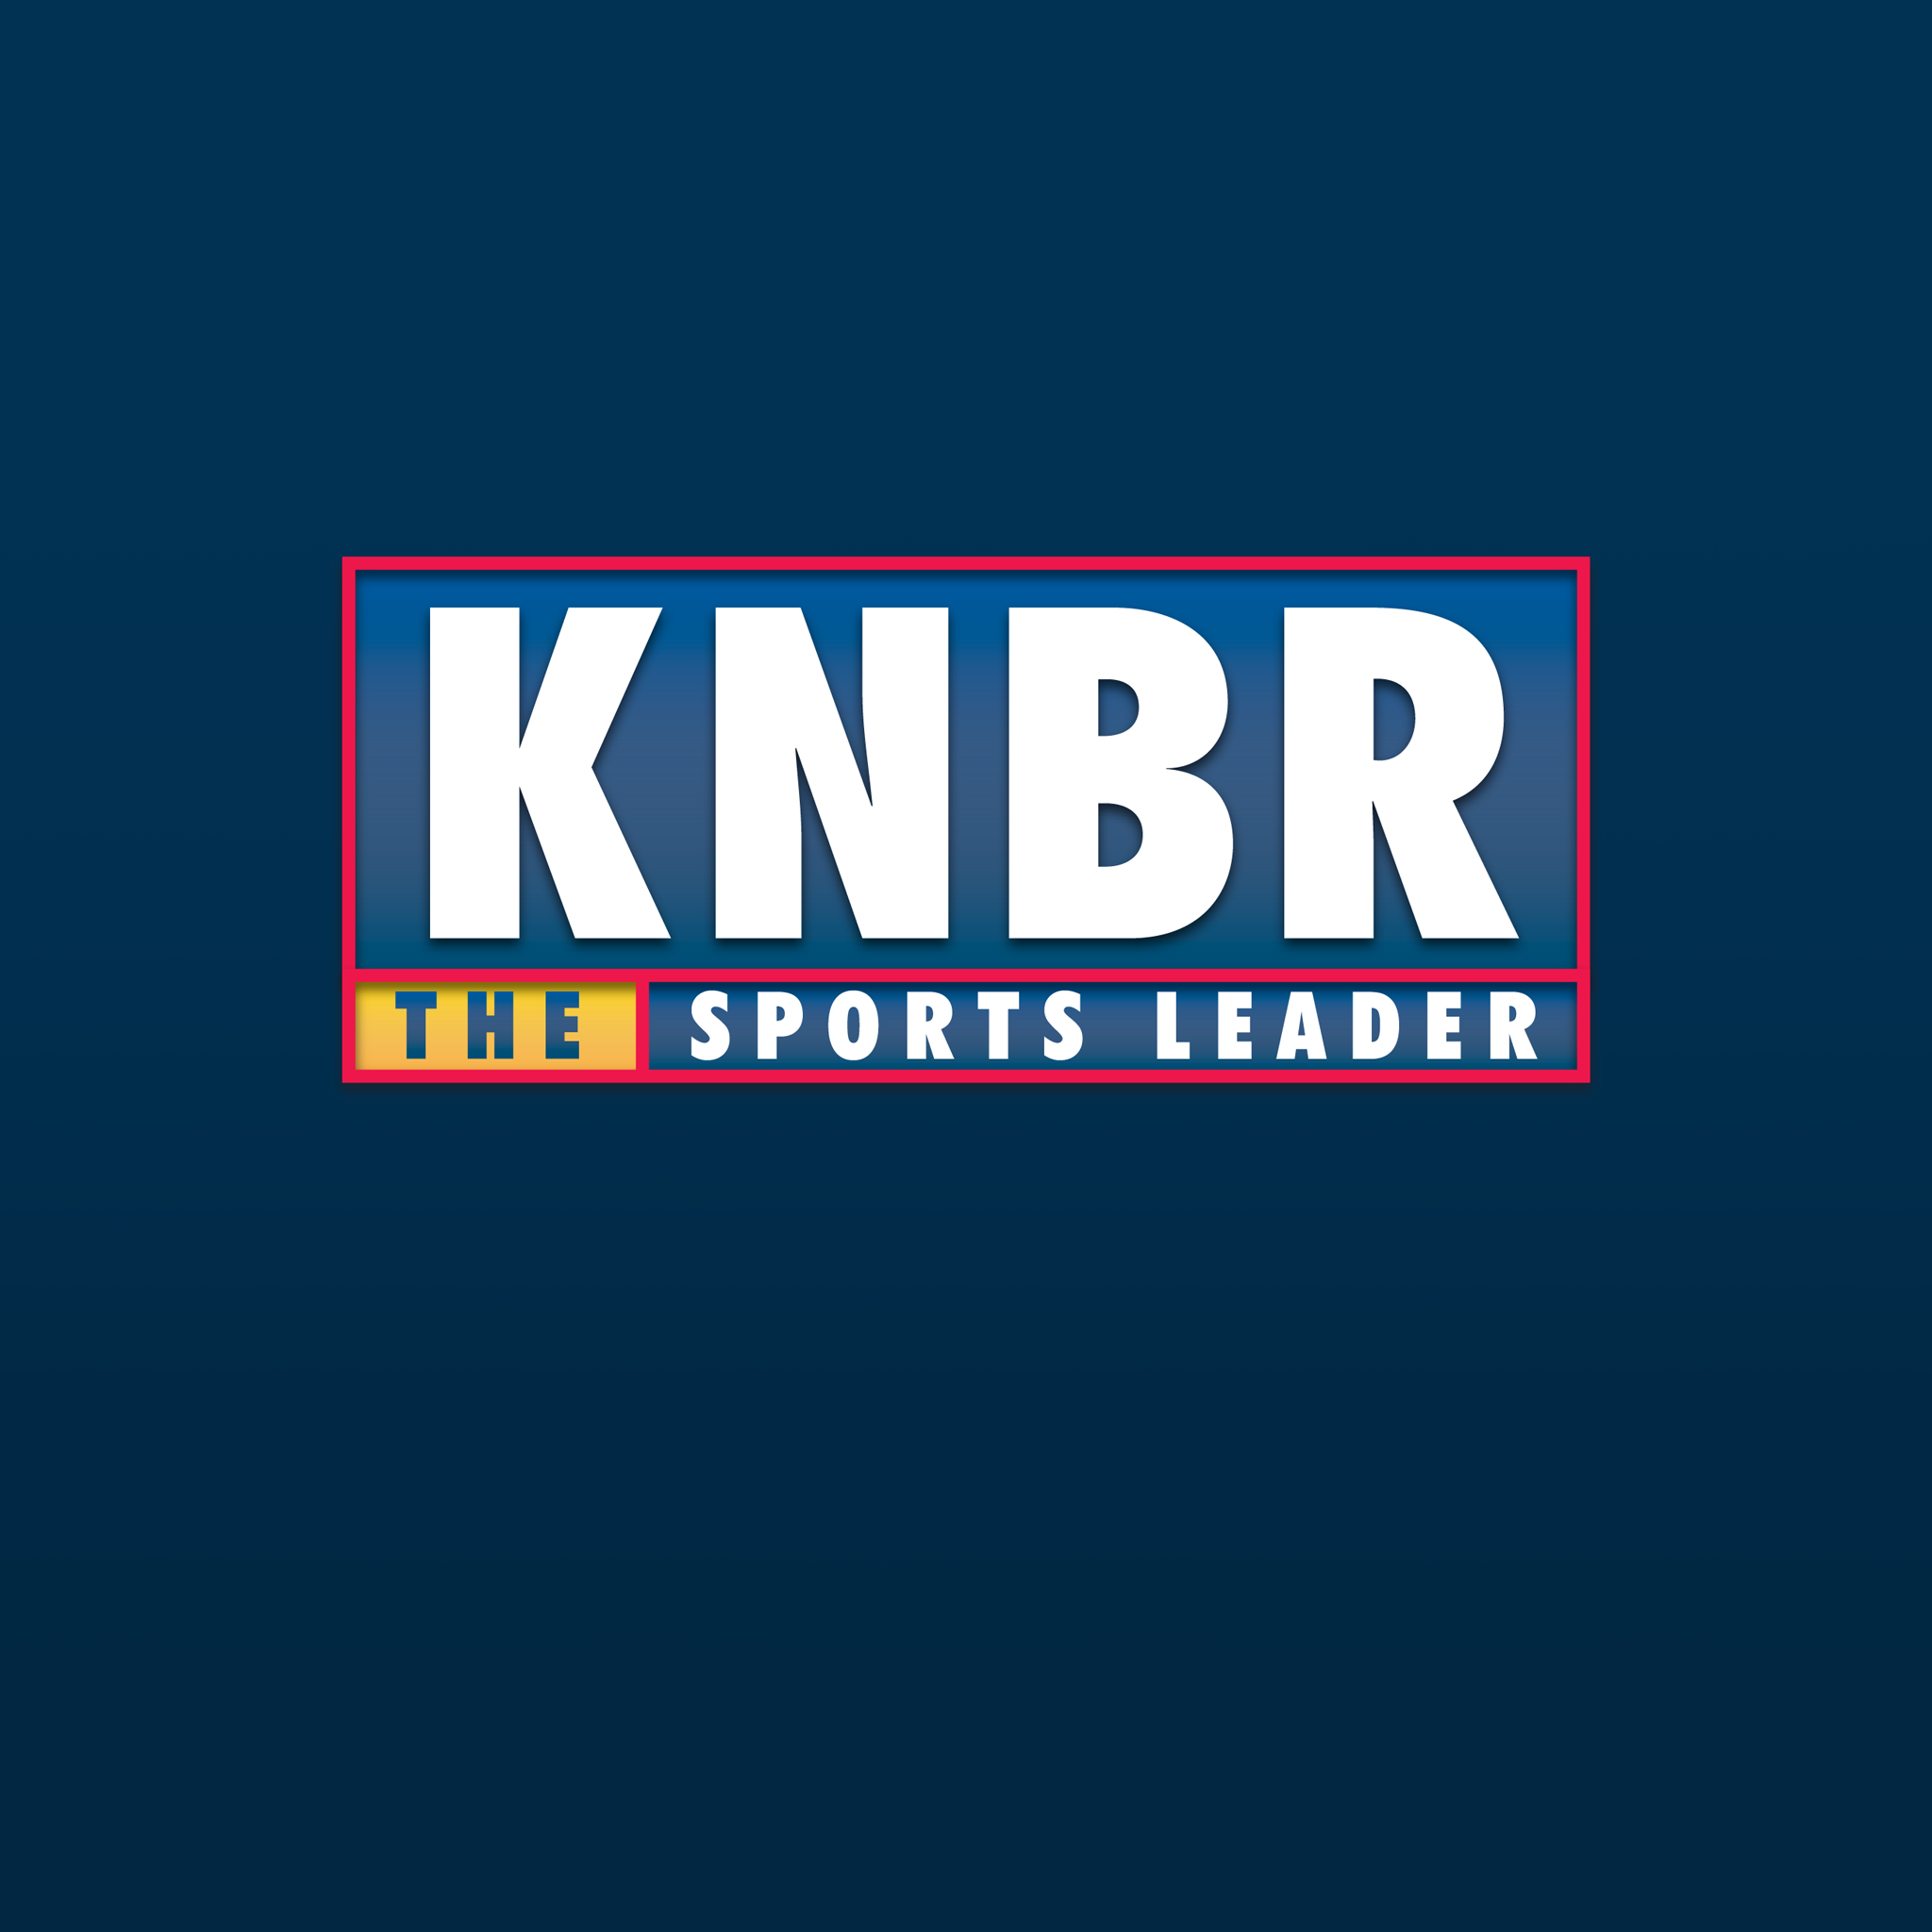 11-30 Matt Maiocco joins Dieter Kurtenbach on the KNBR Morning Show to discuss the magnitude of the 49ers vs Eagles game this weekend and to breakdown a few key matchups to watch